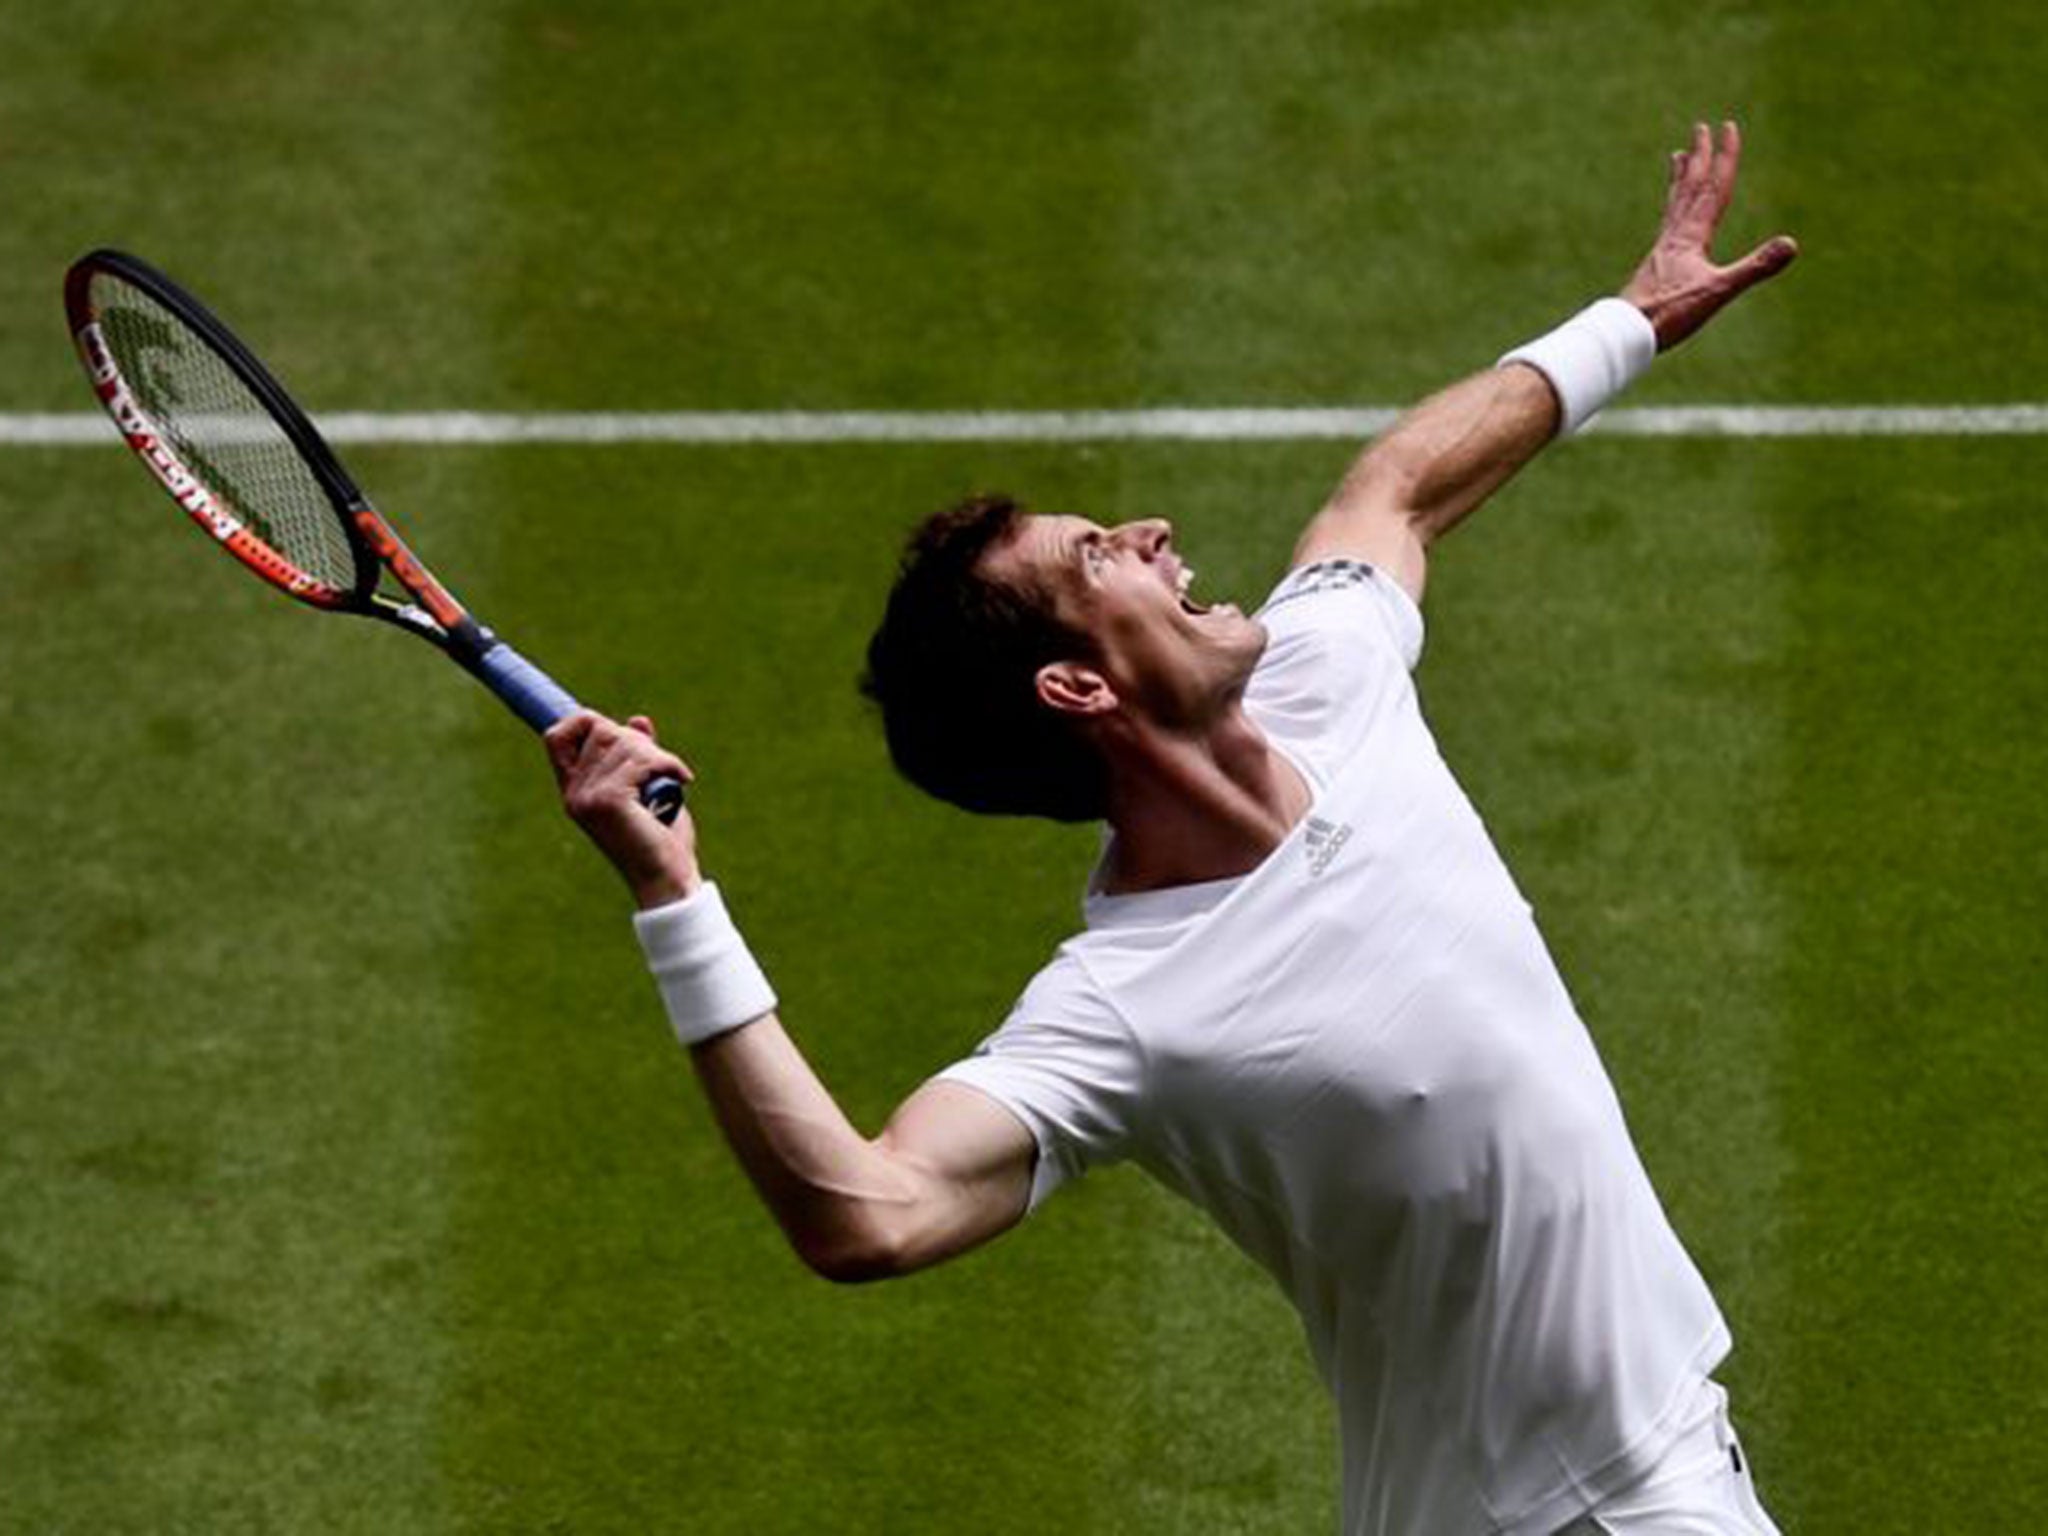 Andy Murray was convincing in wrapping up a 6-1 6-4 7-5 victory in two hours and two minutes over David Goffin